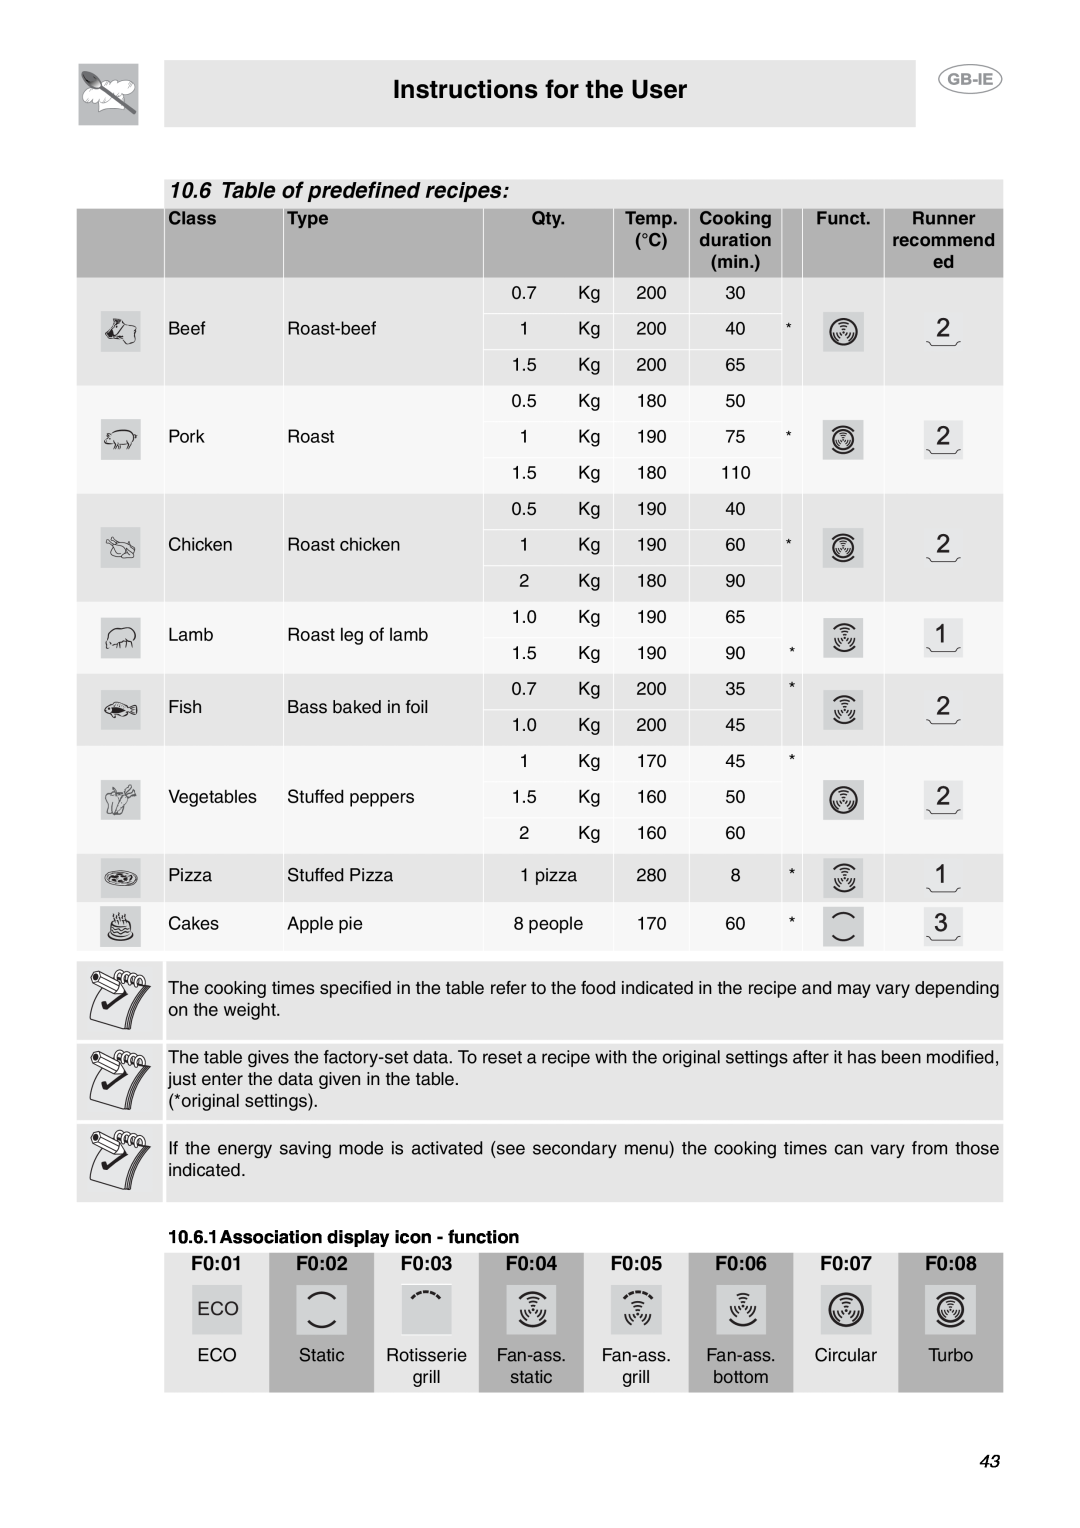 Smeg CE6IMX Table of predefined recipes, Instructions for the User, F001, F002, F003, F004, F005, F006, F007, F008, Class 